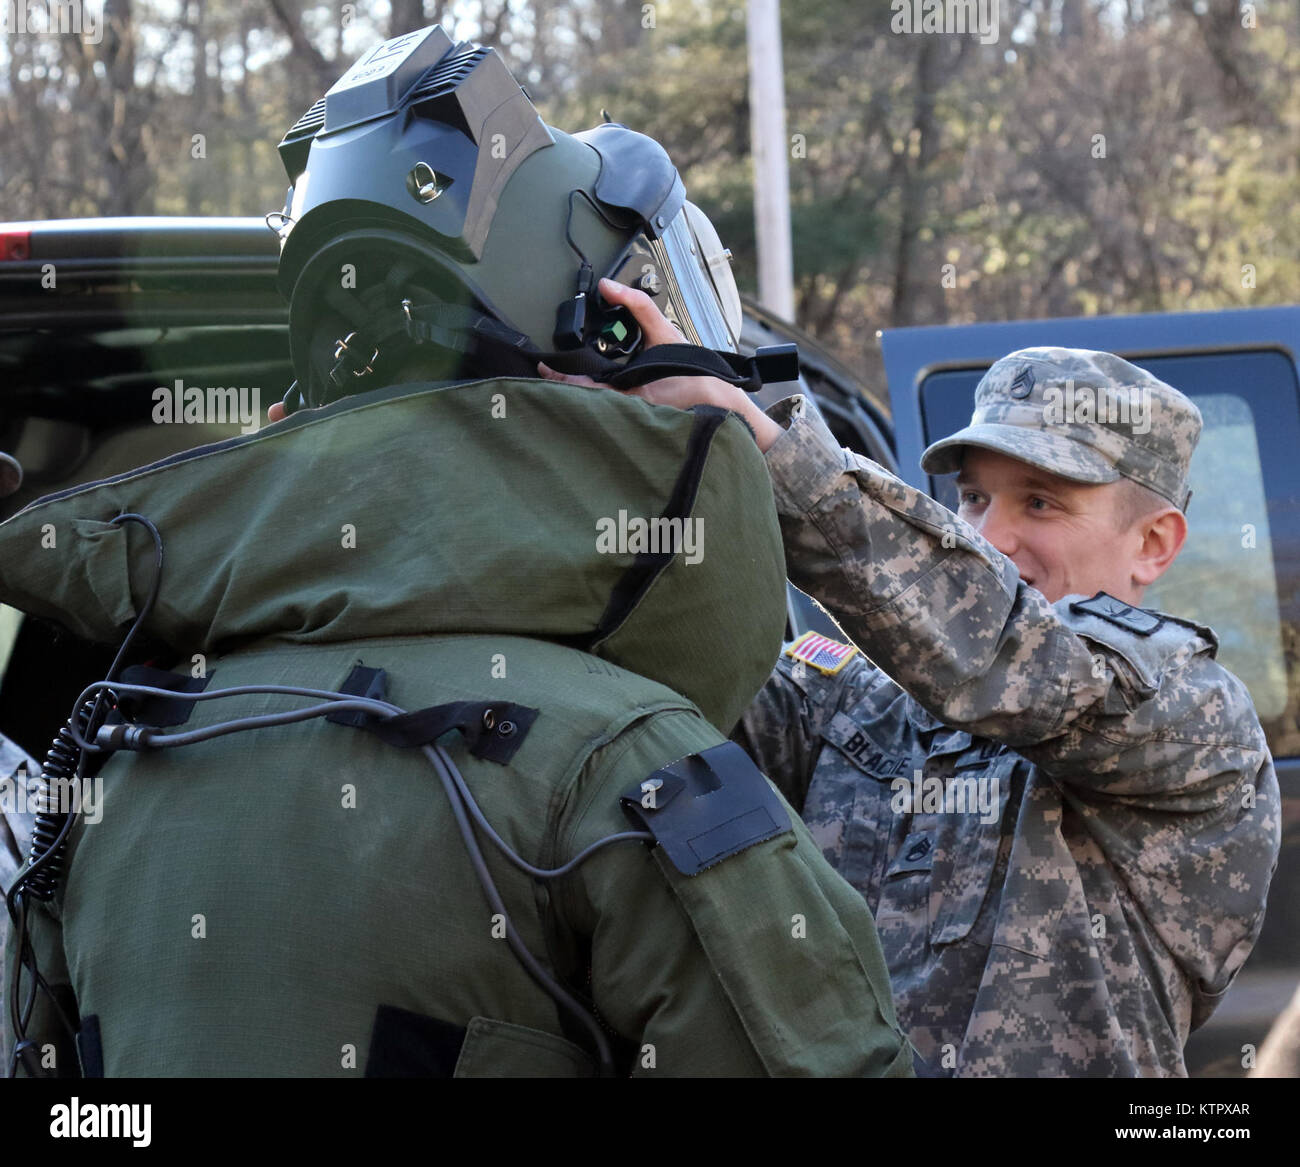 Staff Sgt. Jeremy Blackie, a Soldier in the New York Army National Guard's 1108th Explosive Ordnance Disposal (EOD) Company, puts the bomb disposal suit’s helmet on Staff Sgt. Evan Putman, who is also a Soldier in the 1108th EOD, during a two-day joint training tactical operation with the Columbia-Greene County Shared Services Response Team at the 911 Call Center in Cairo, NY on February 2, 2016. (U.S. Army National Guard photo by Sgt. Michael Davis/Released) Stock Photo